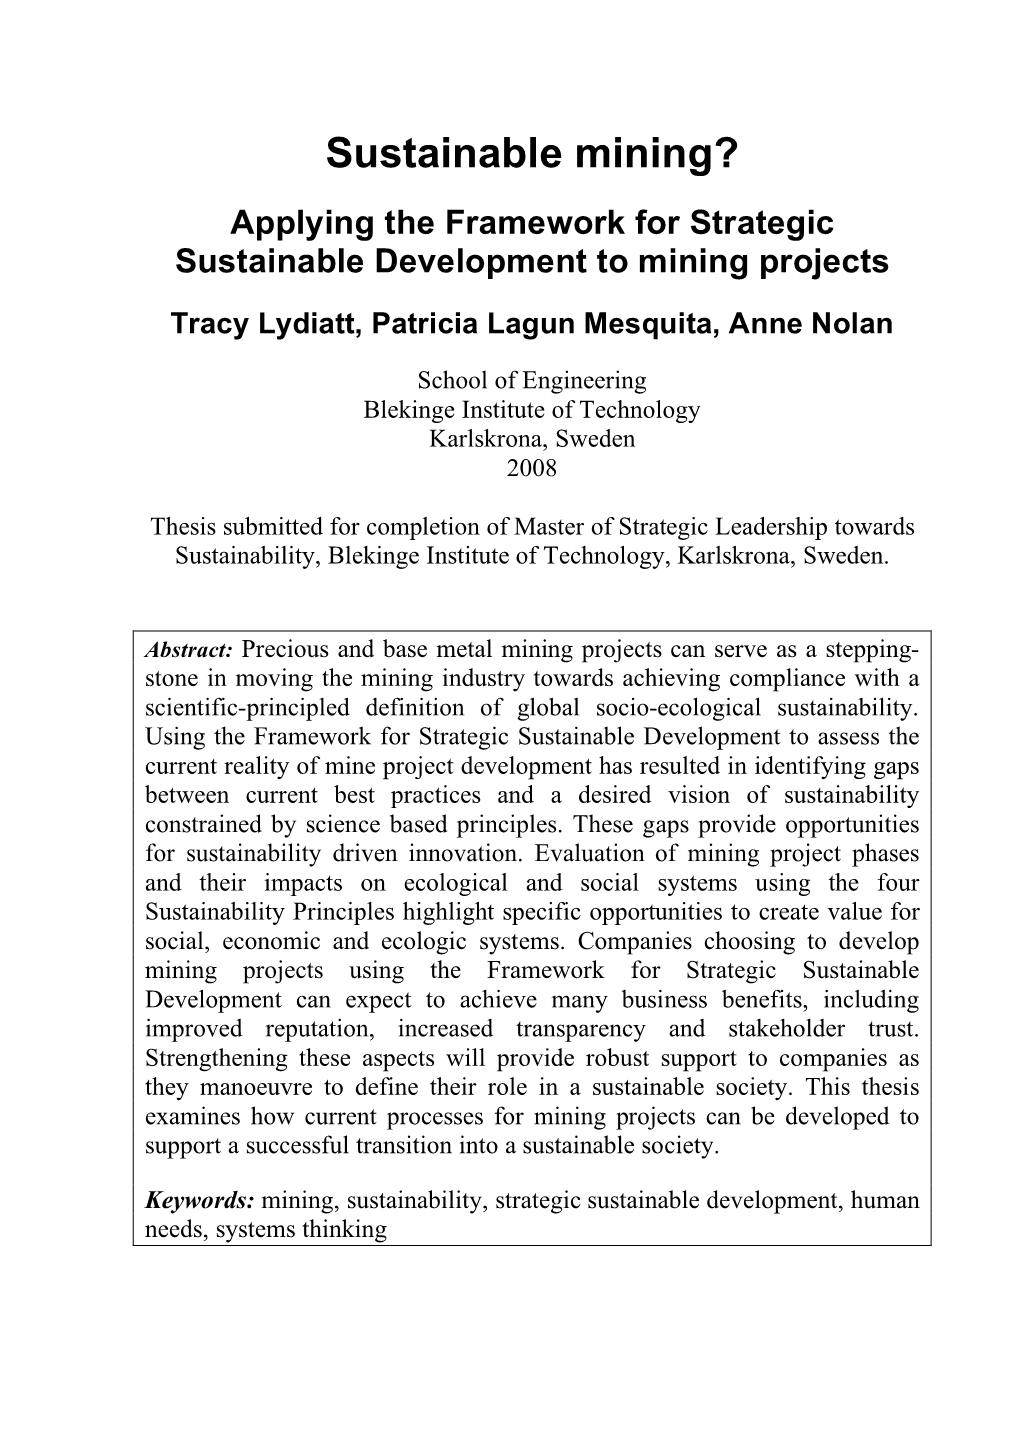 Sustainable Mining? Applying the Framework for Strategic Sustainable Development to Mining Projects